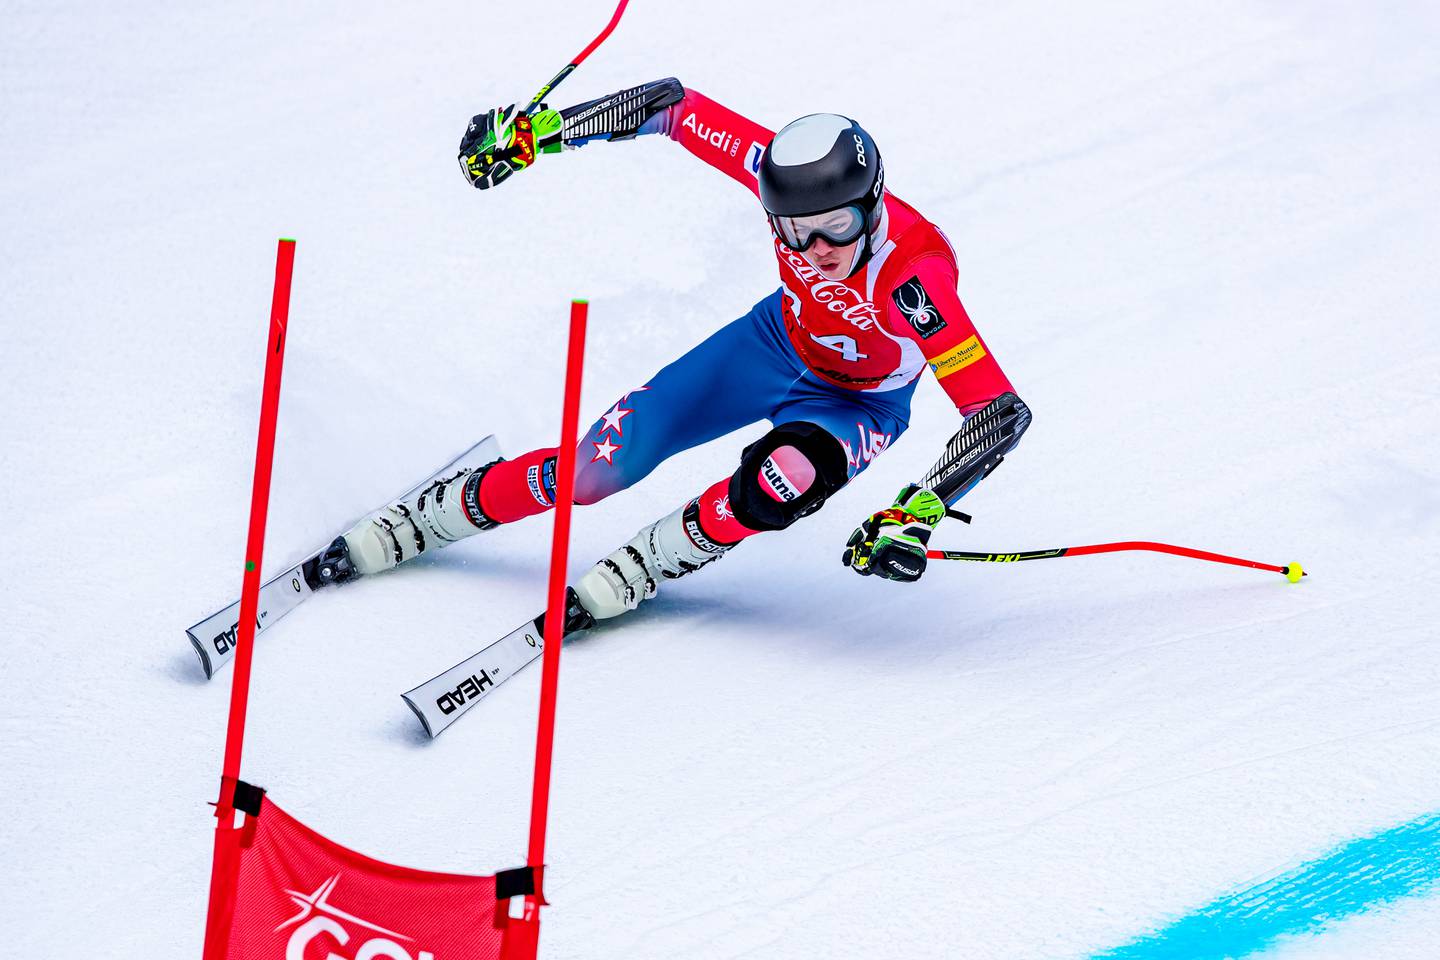 Finnigan Donley competes in the giant slalom at the Alyeska Cup